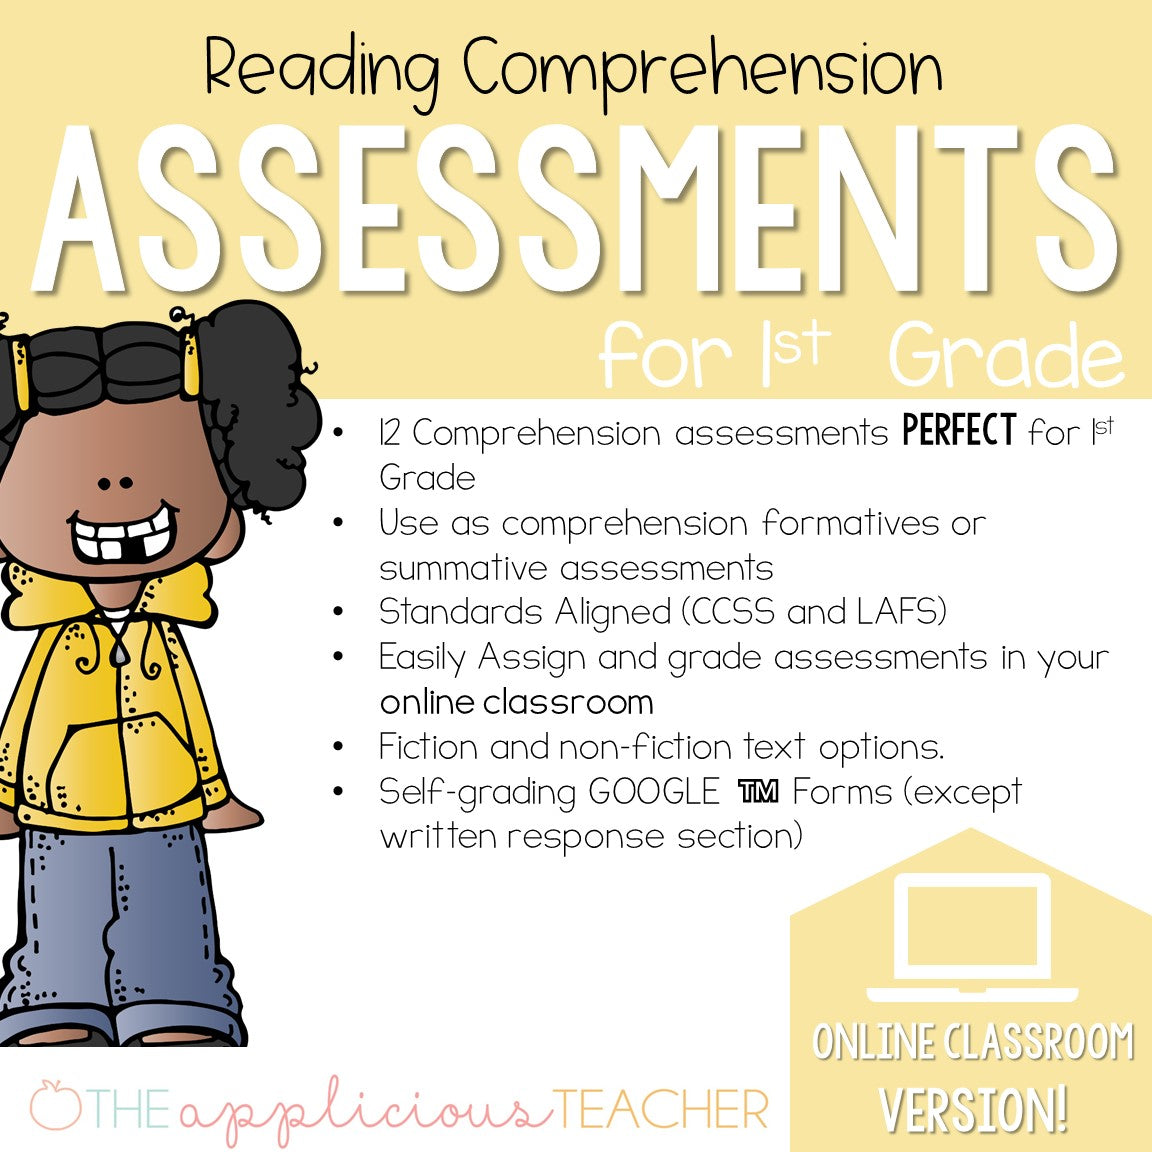 CLASSROOM　Resource　DIGITAL　Reading　Teacher　Comprehension　Applicious　The　Assessments　–　Grade　1st　Store